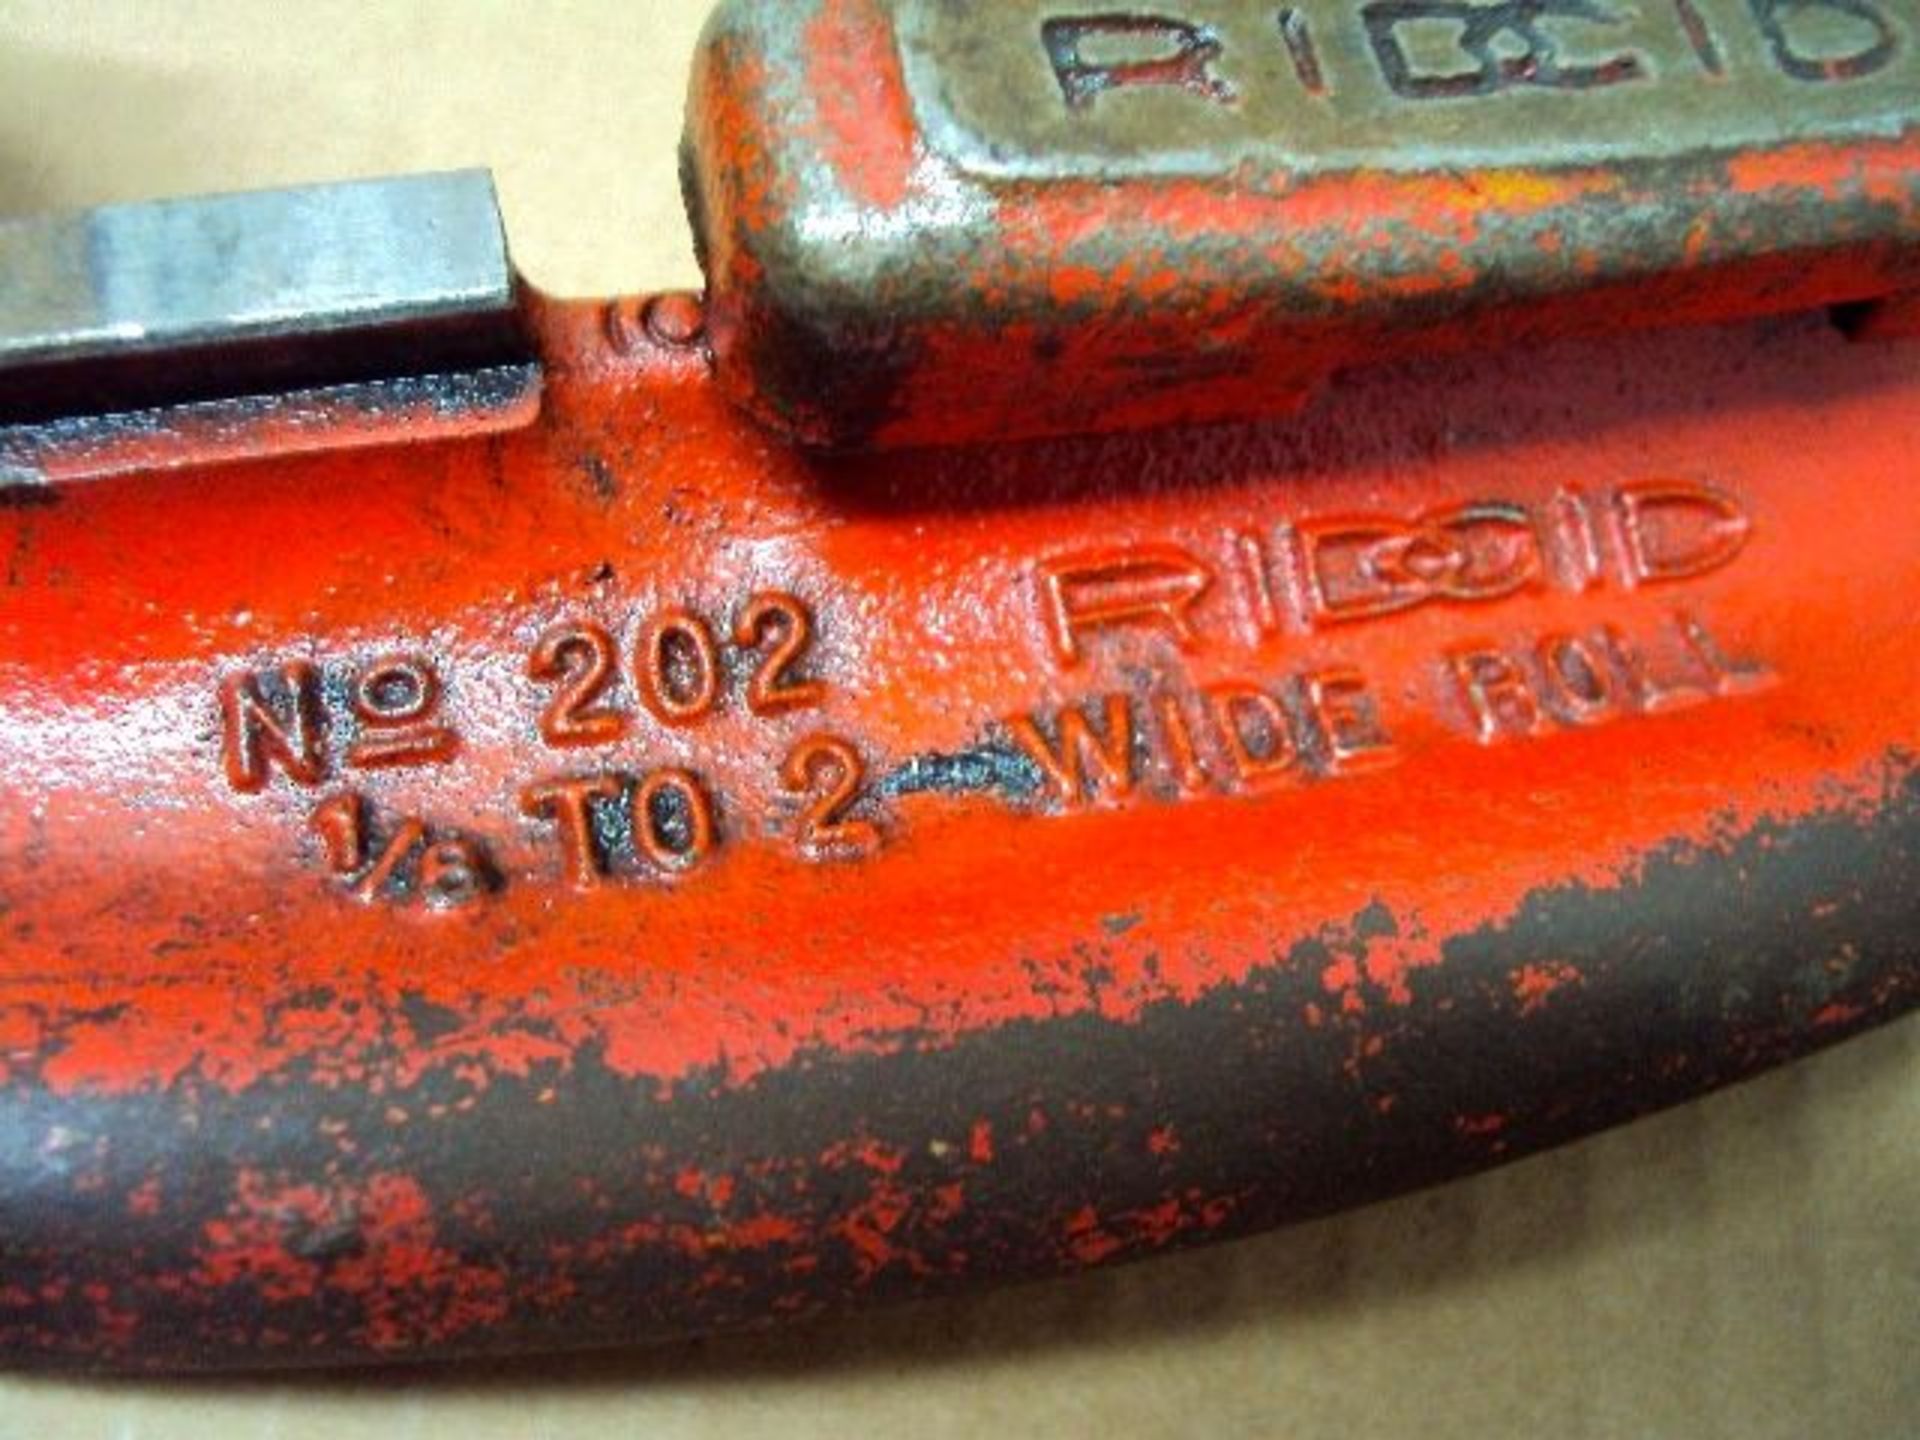 Ridgid No. 202 1/8” to 2” Pipe Cutter /257 - Image 3 of 3